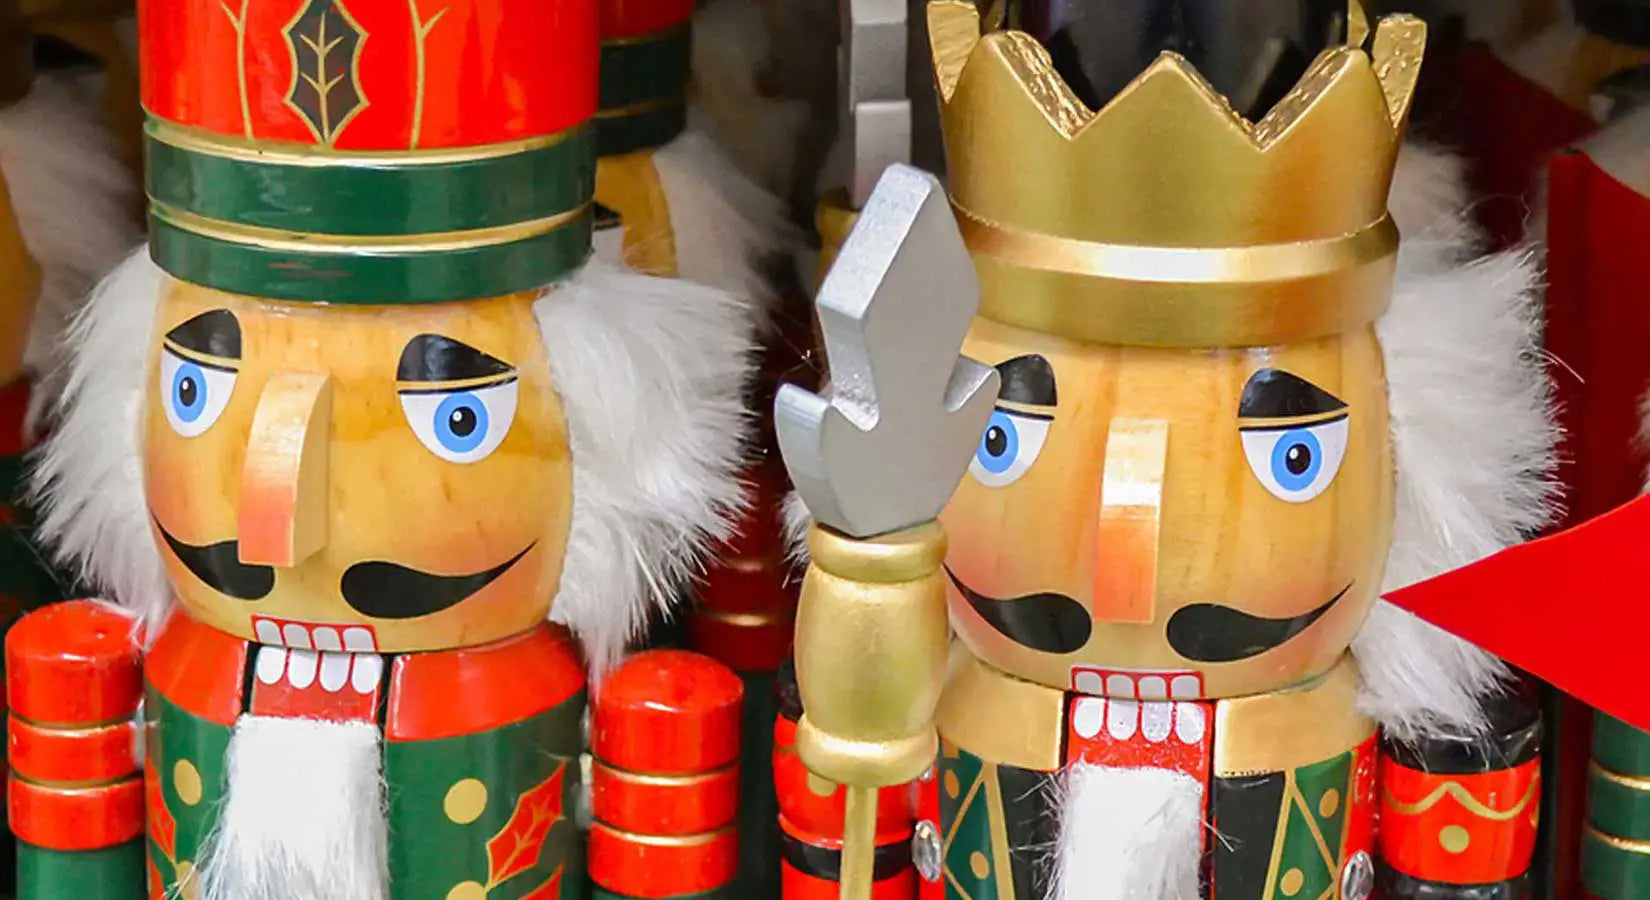 Decorative Nutcrackers Make Great Gifts or Personal Collections | Coastal Gifts Inc